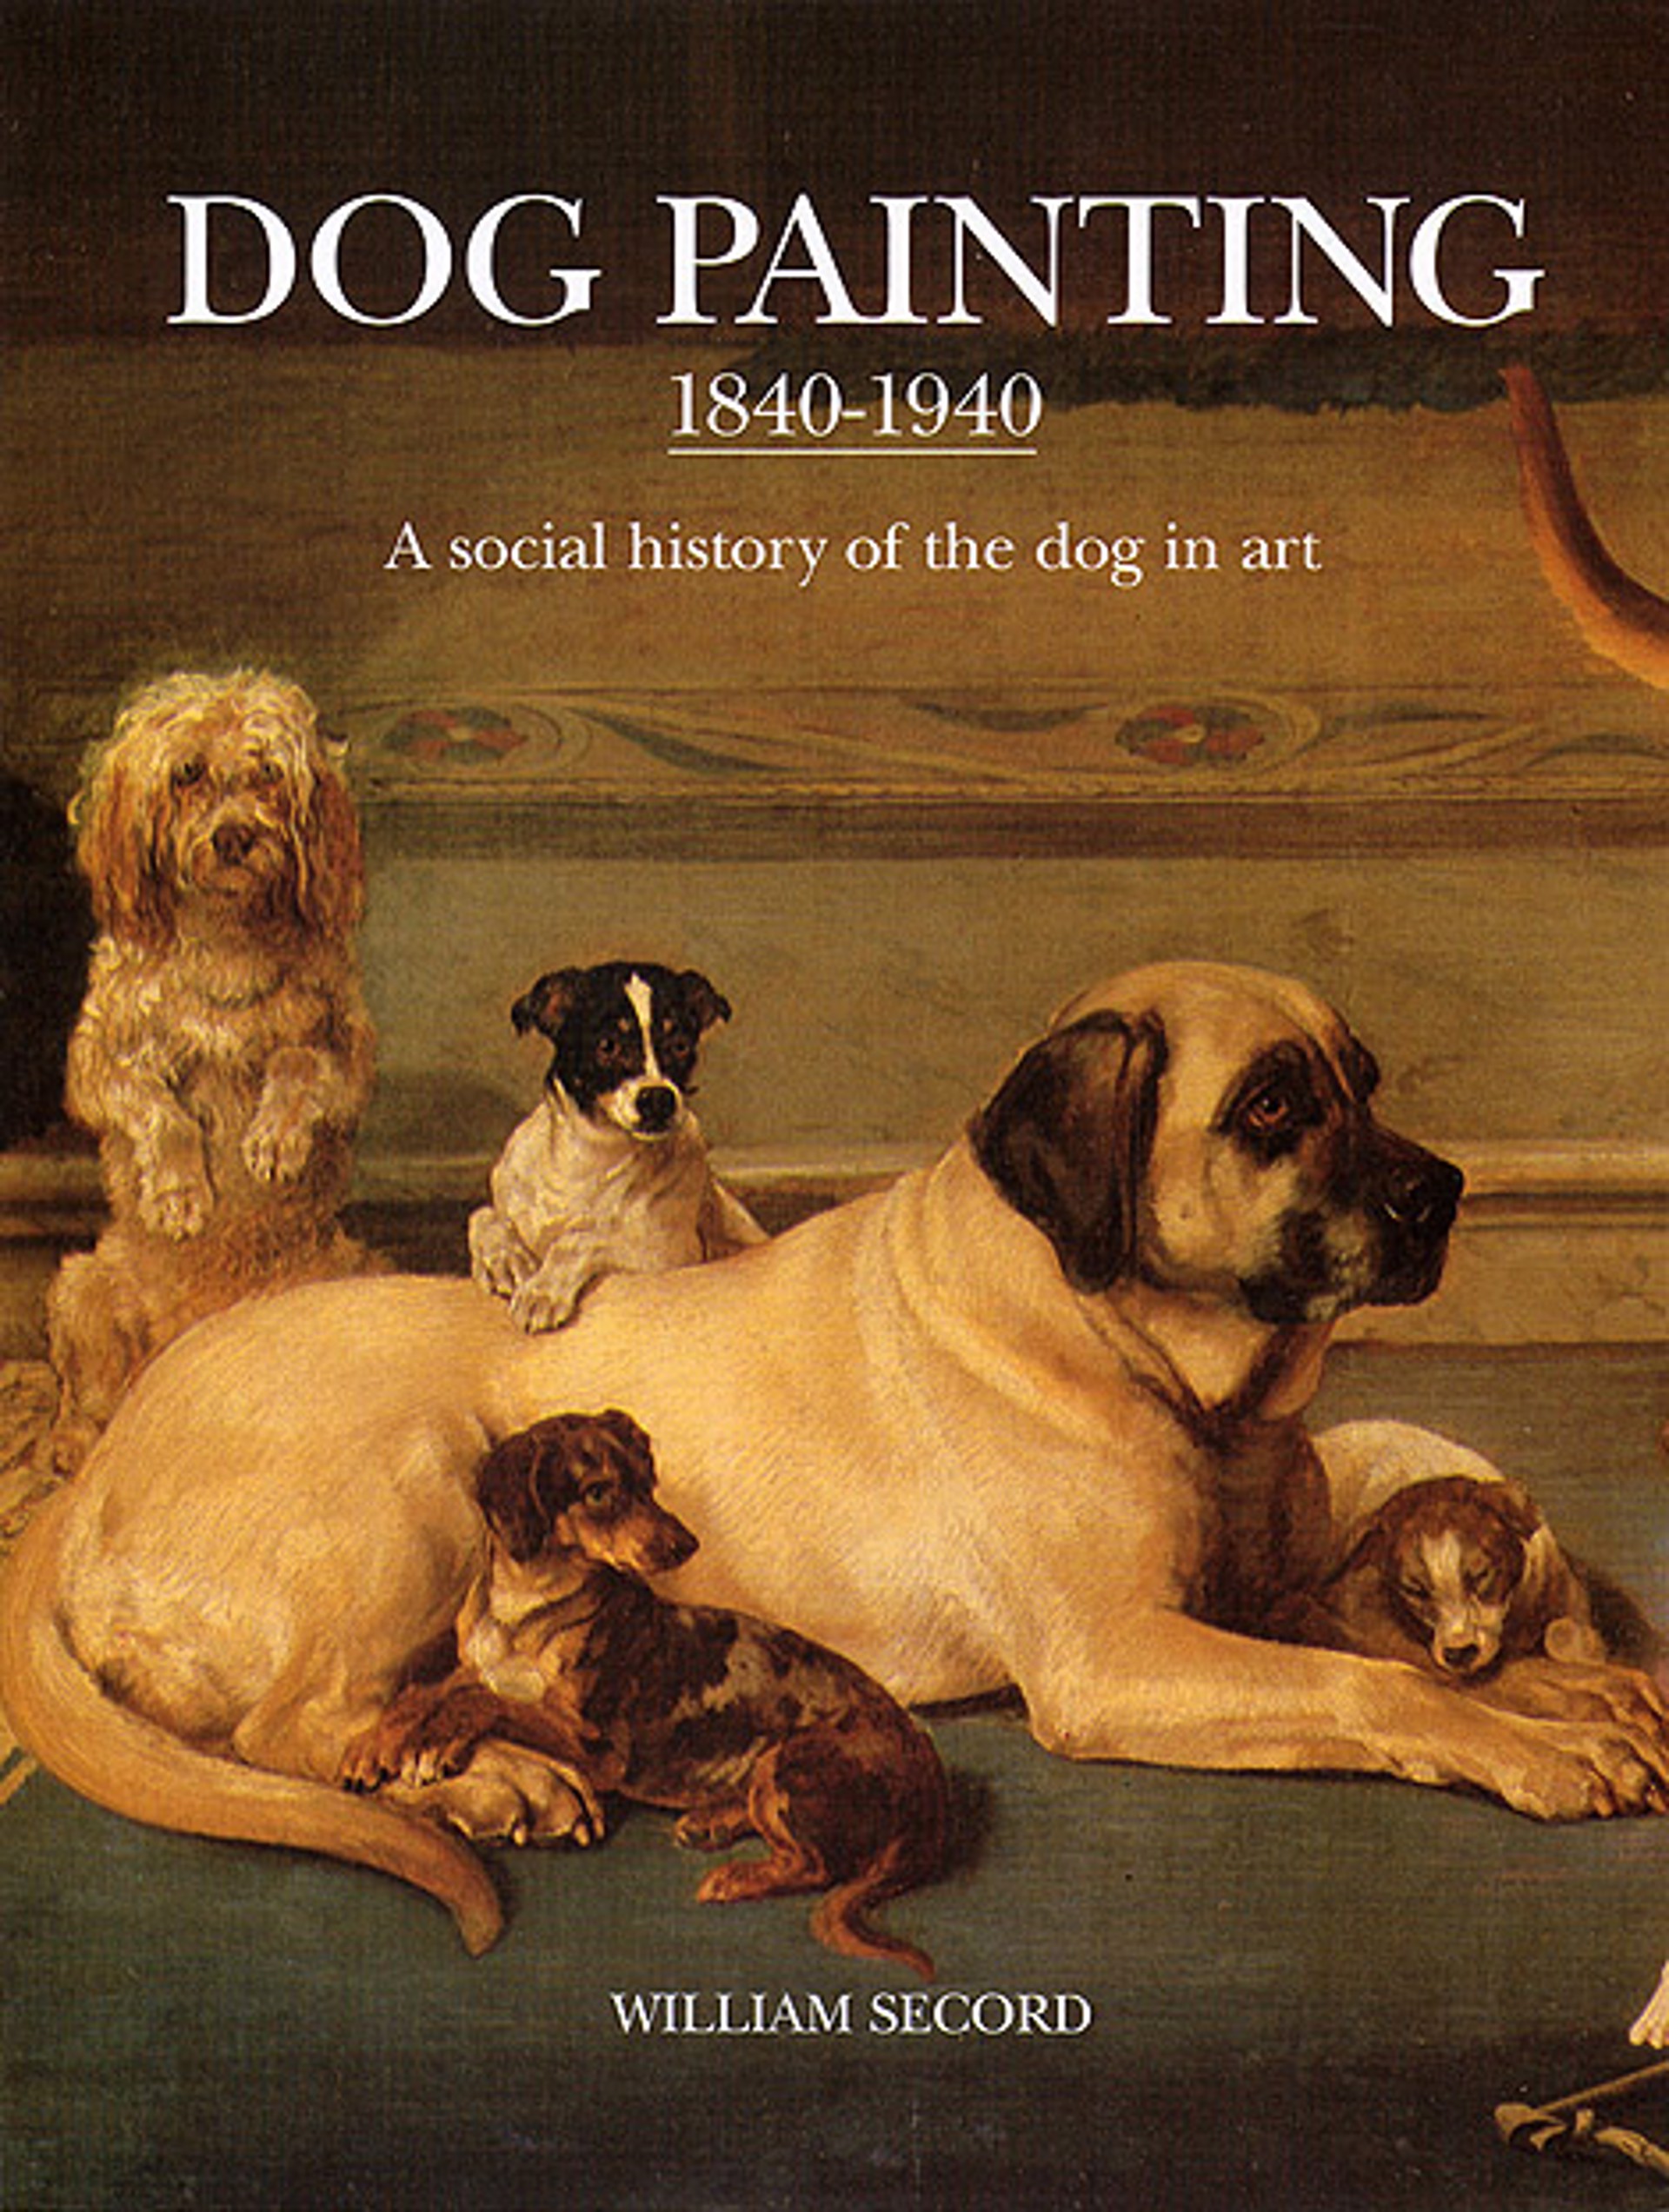 Dog Painting, 1840-1940 by William Secord